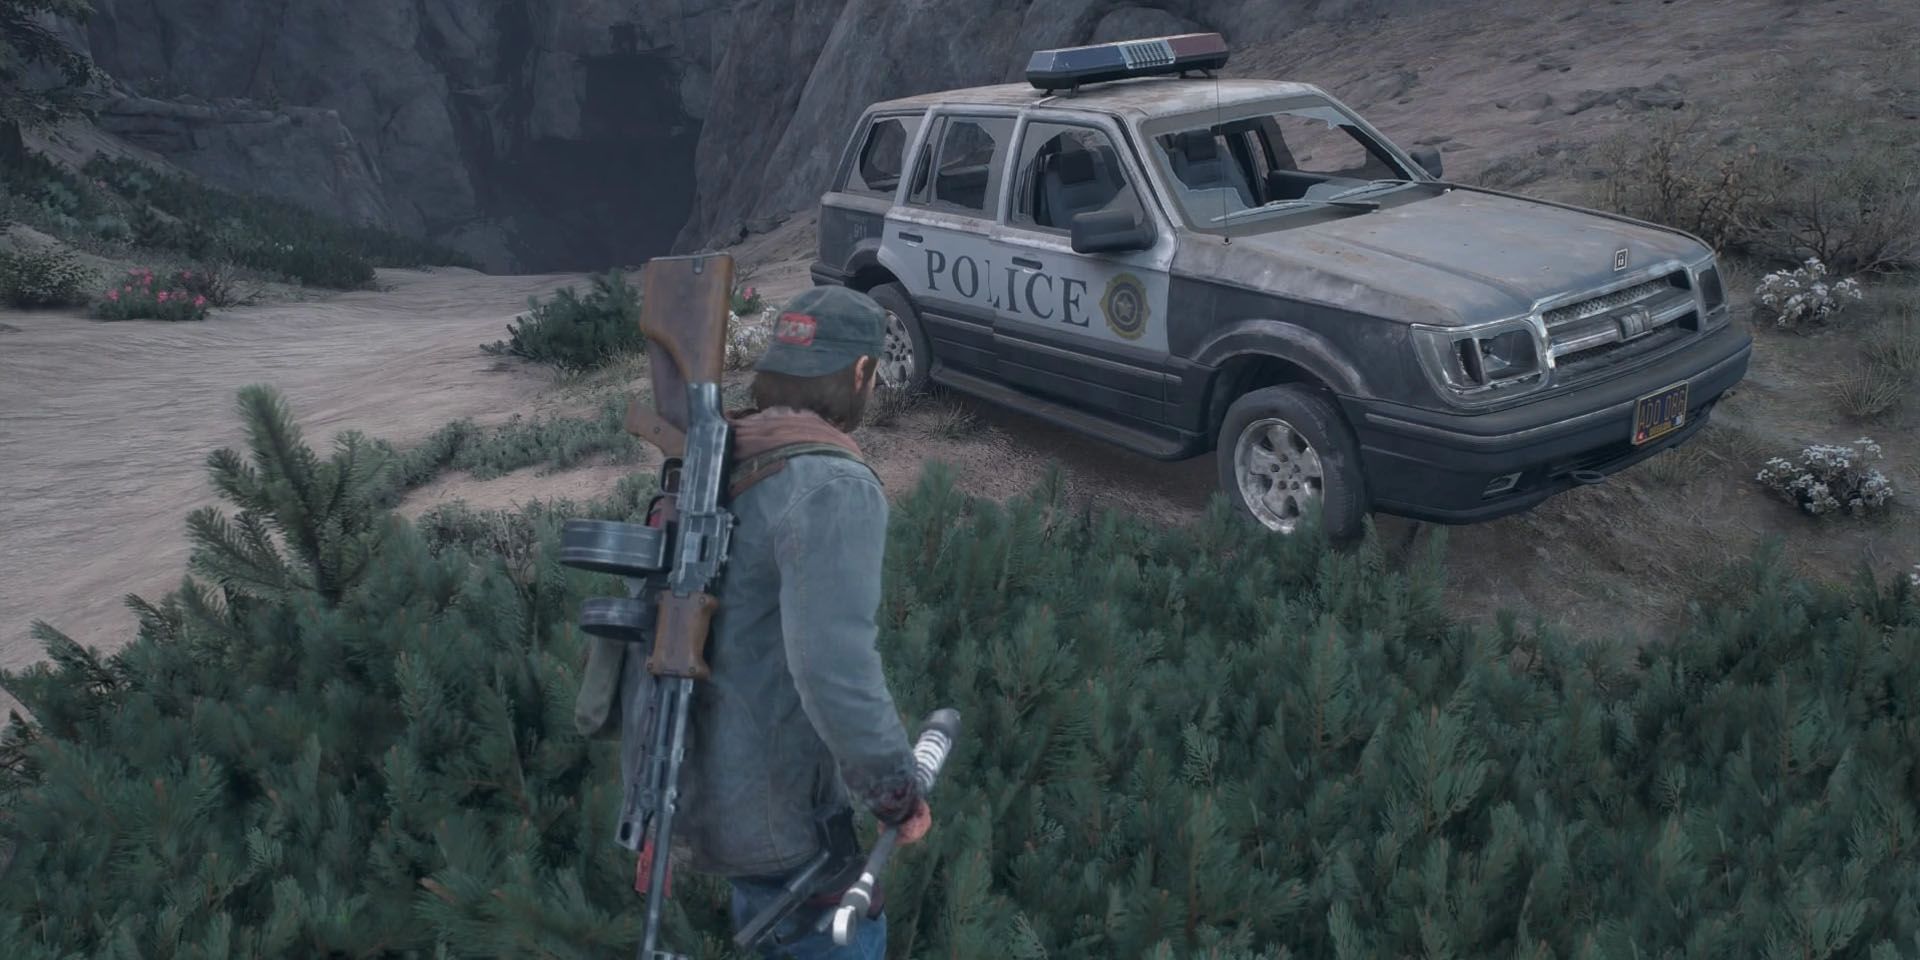 Cop cars are a great source of ammo in Days Gone